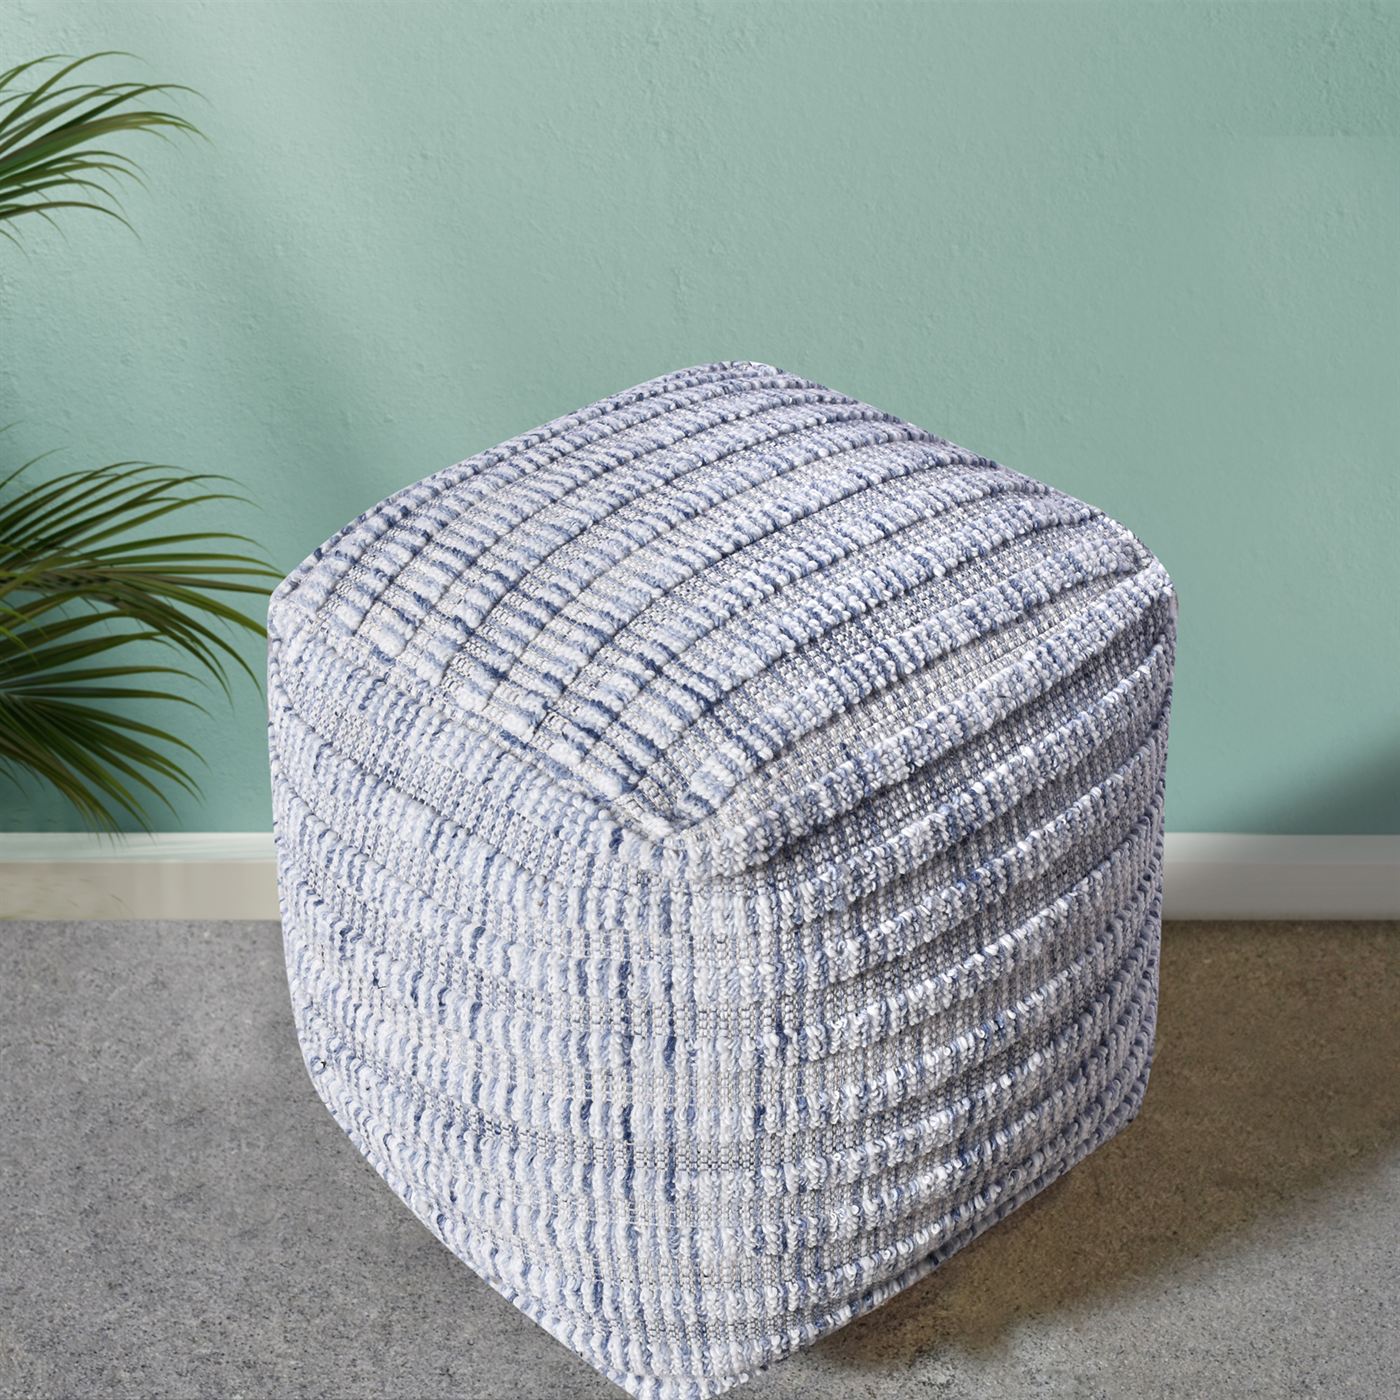 Wasta Pouf, Pet, Blue, Hand woven / All Loop